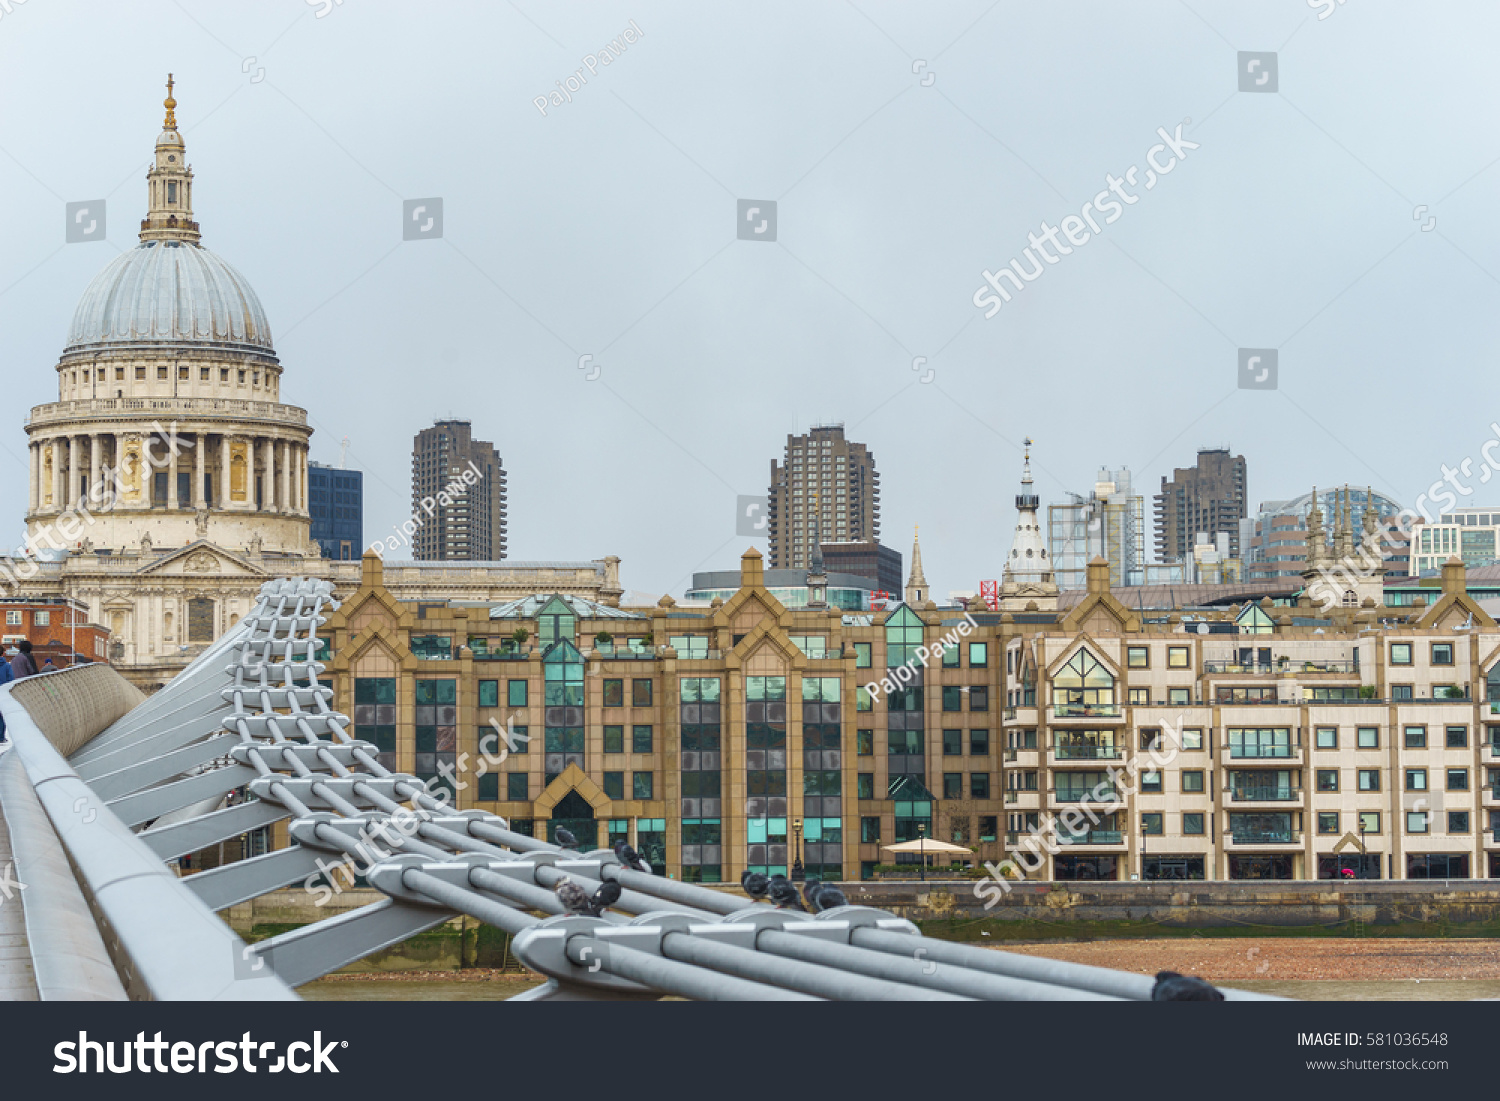 St Paul's cathedral and London cityscape, UK #581036548